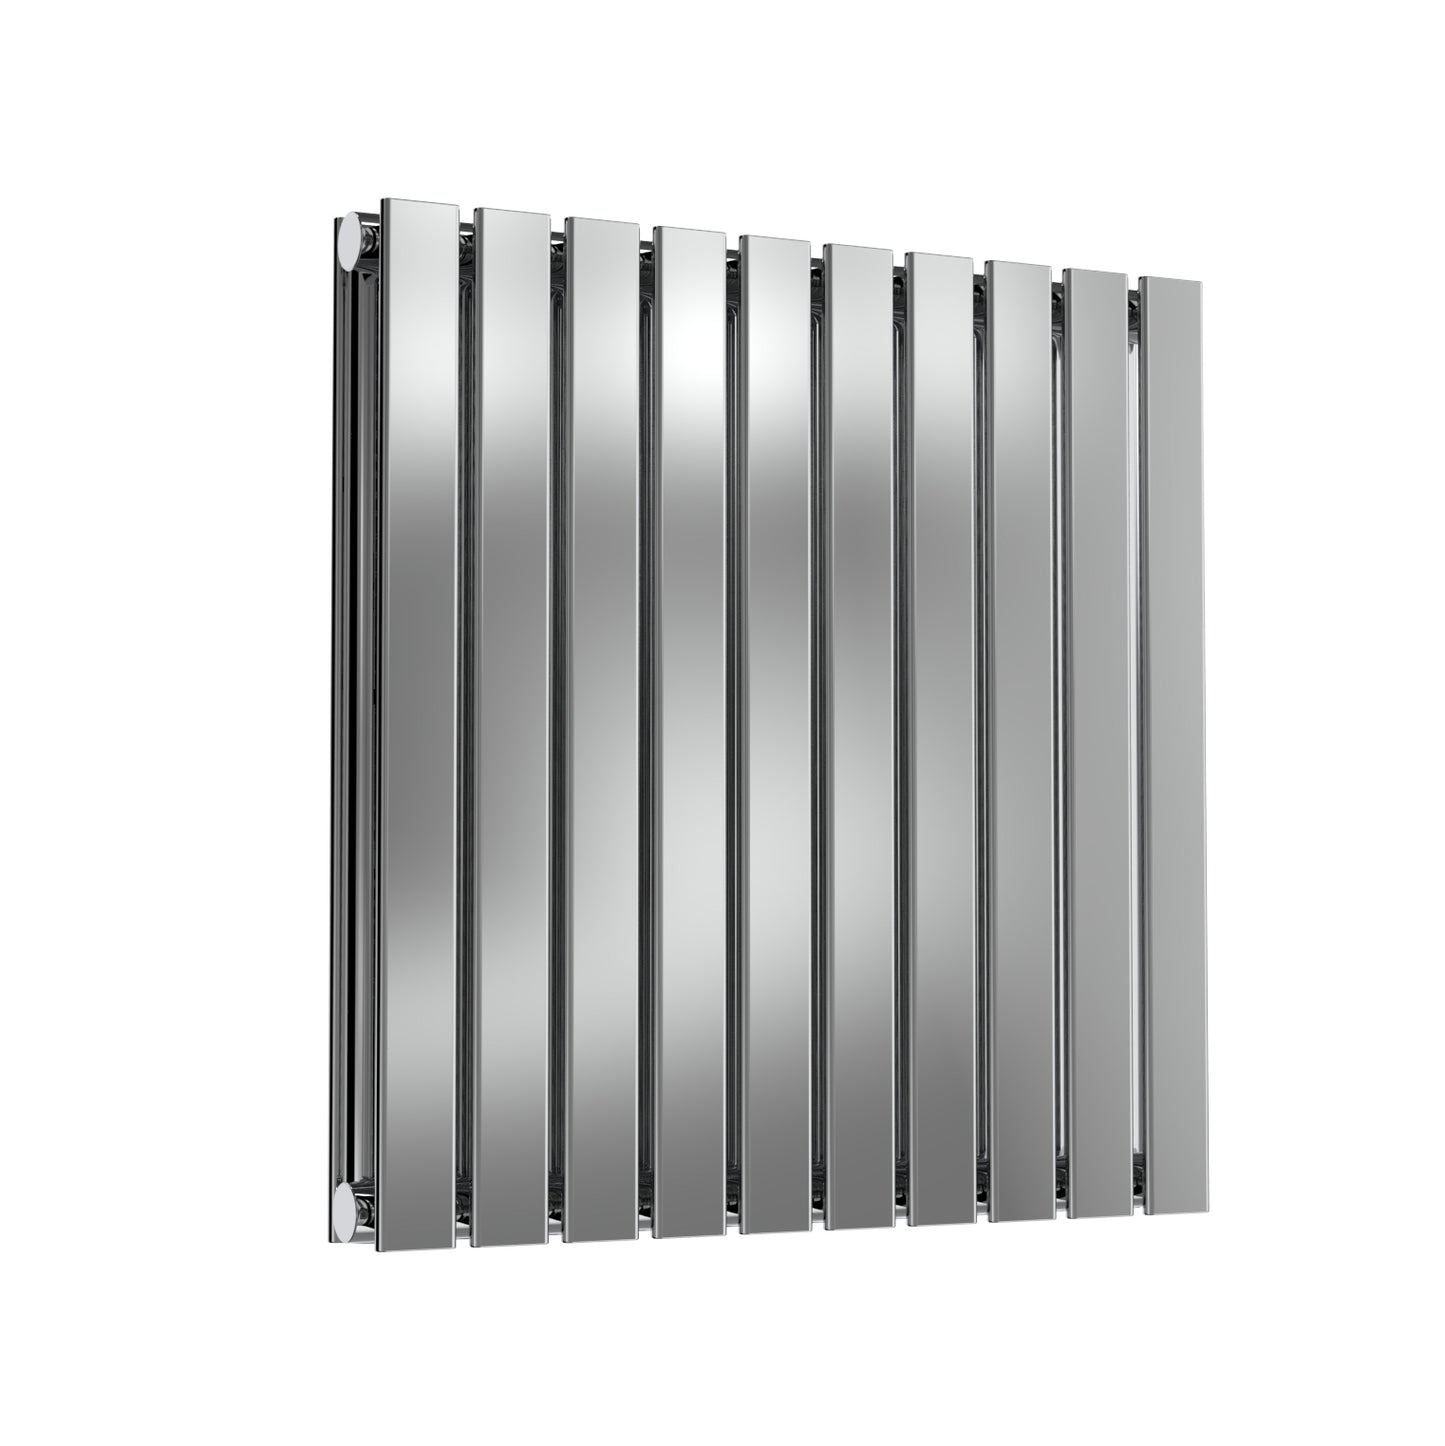 Flox Horizontal Double Radiator - 600mm Tall - Polished Stainless Steel - Various Sizes